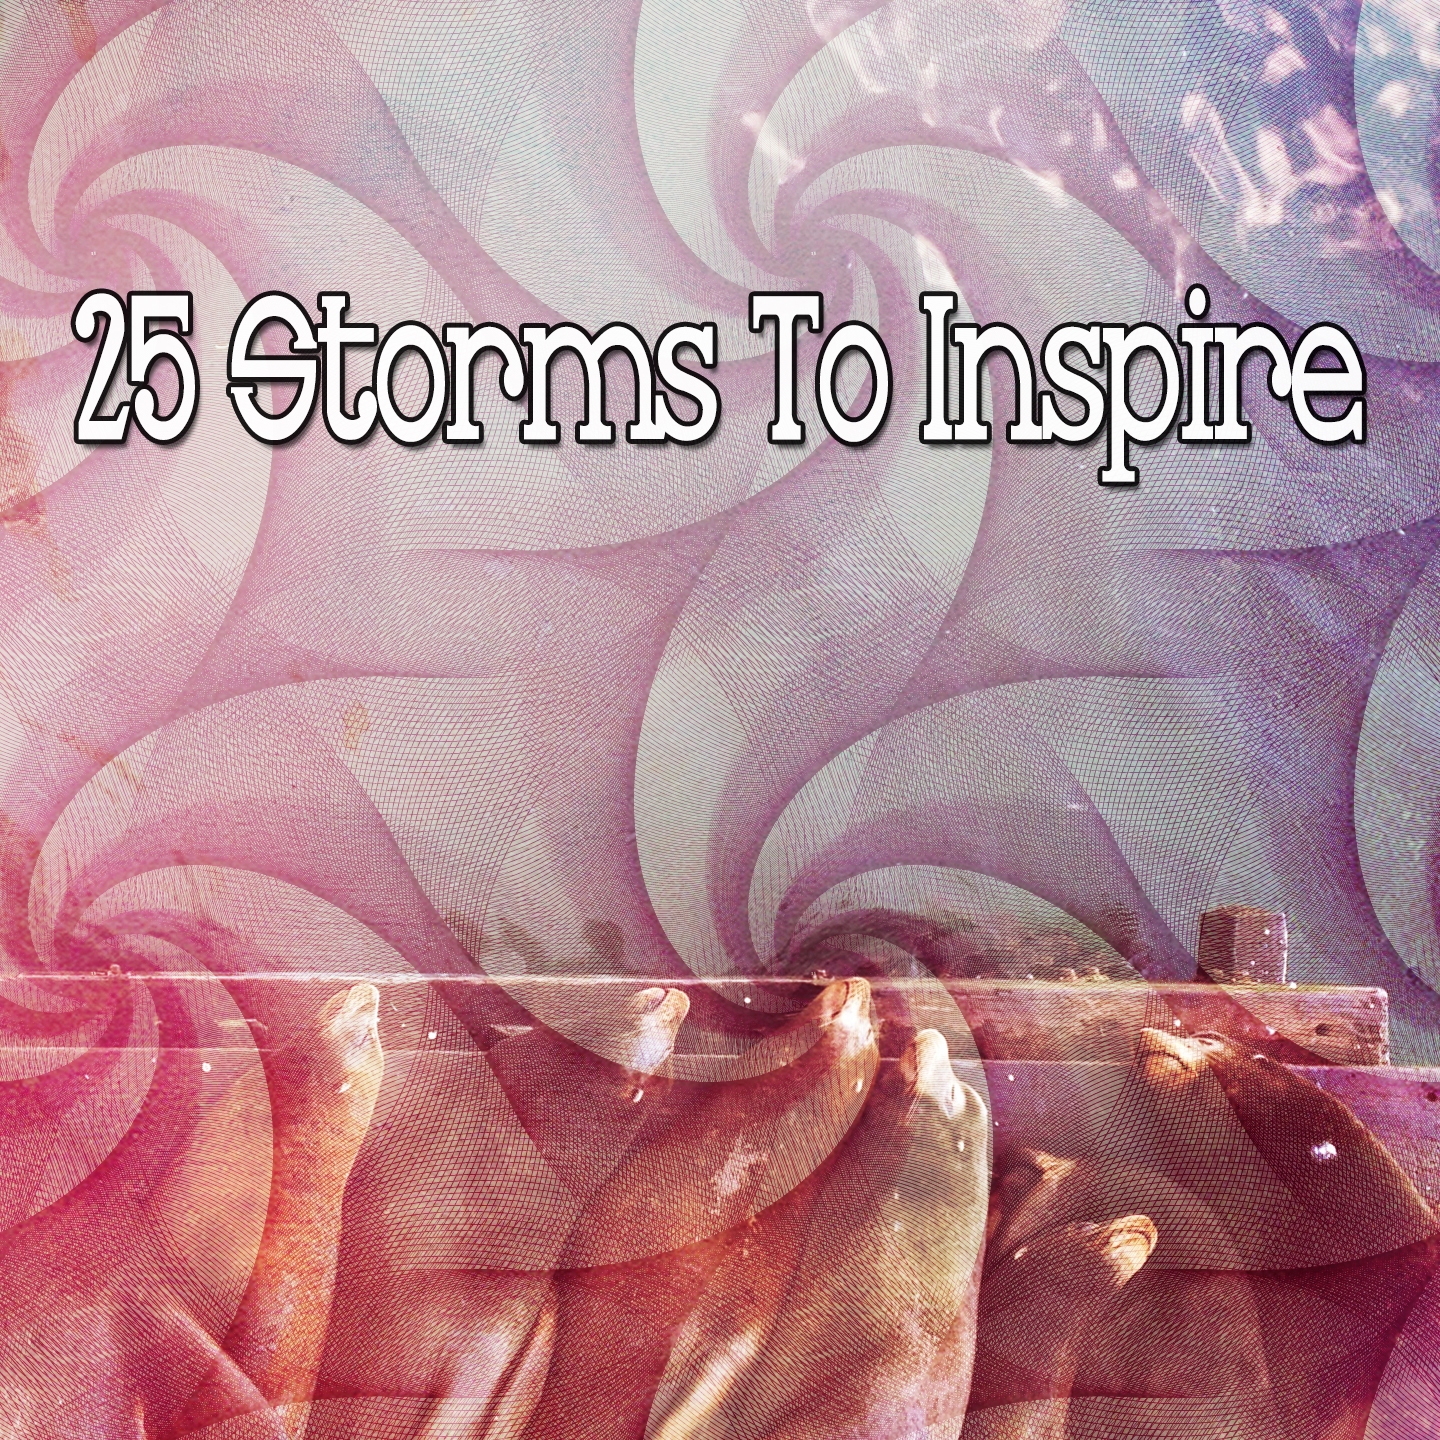 25 Storms To Inspire